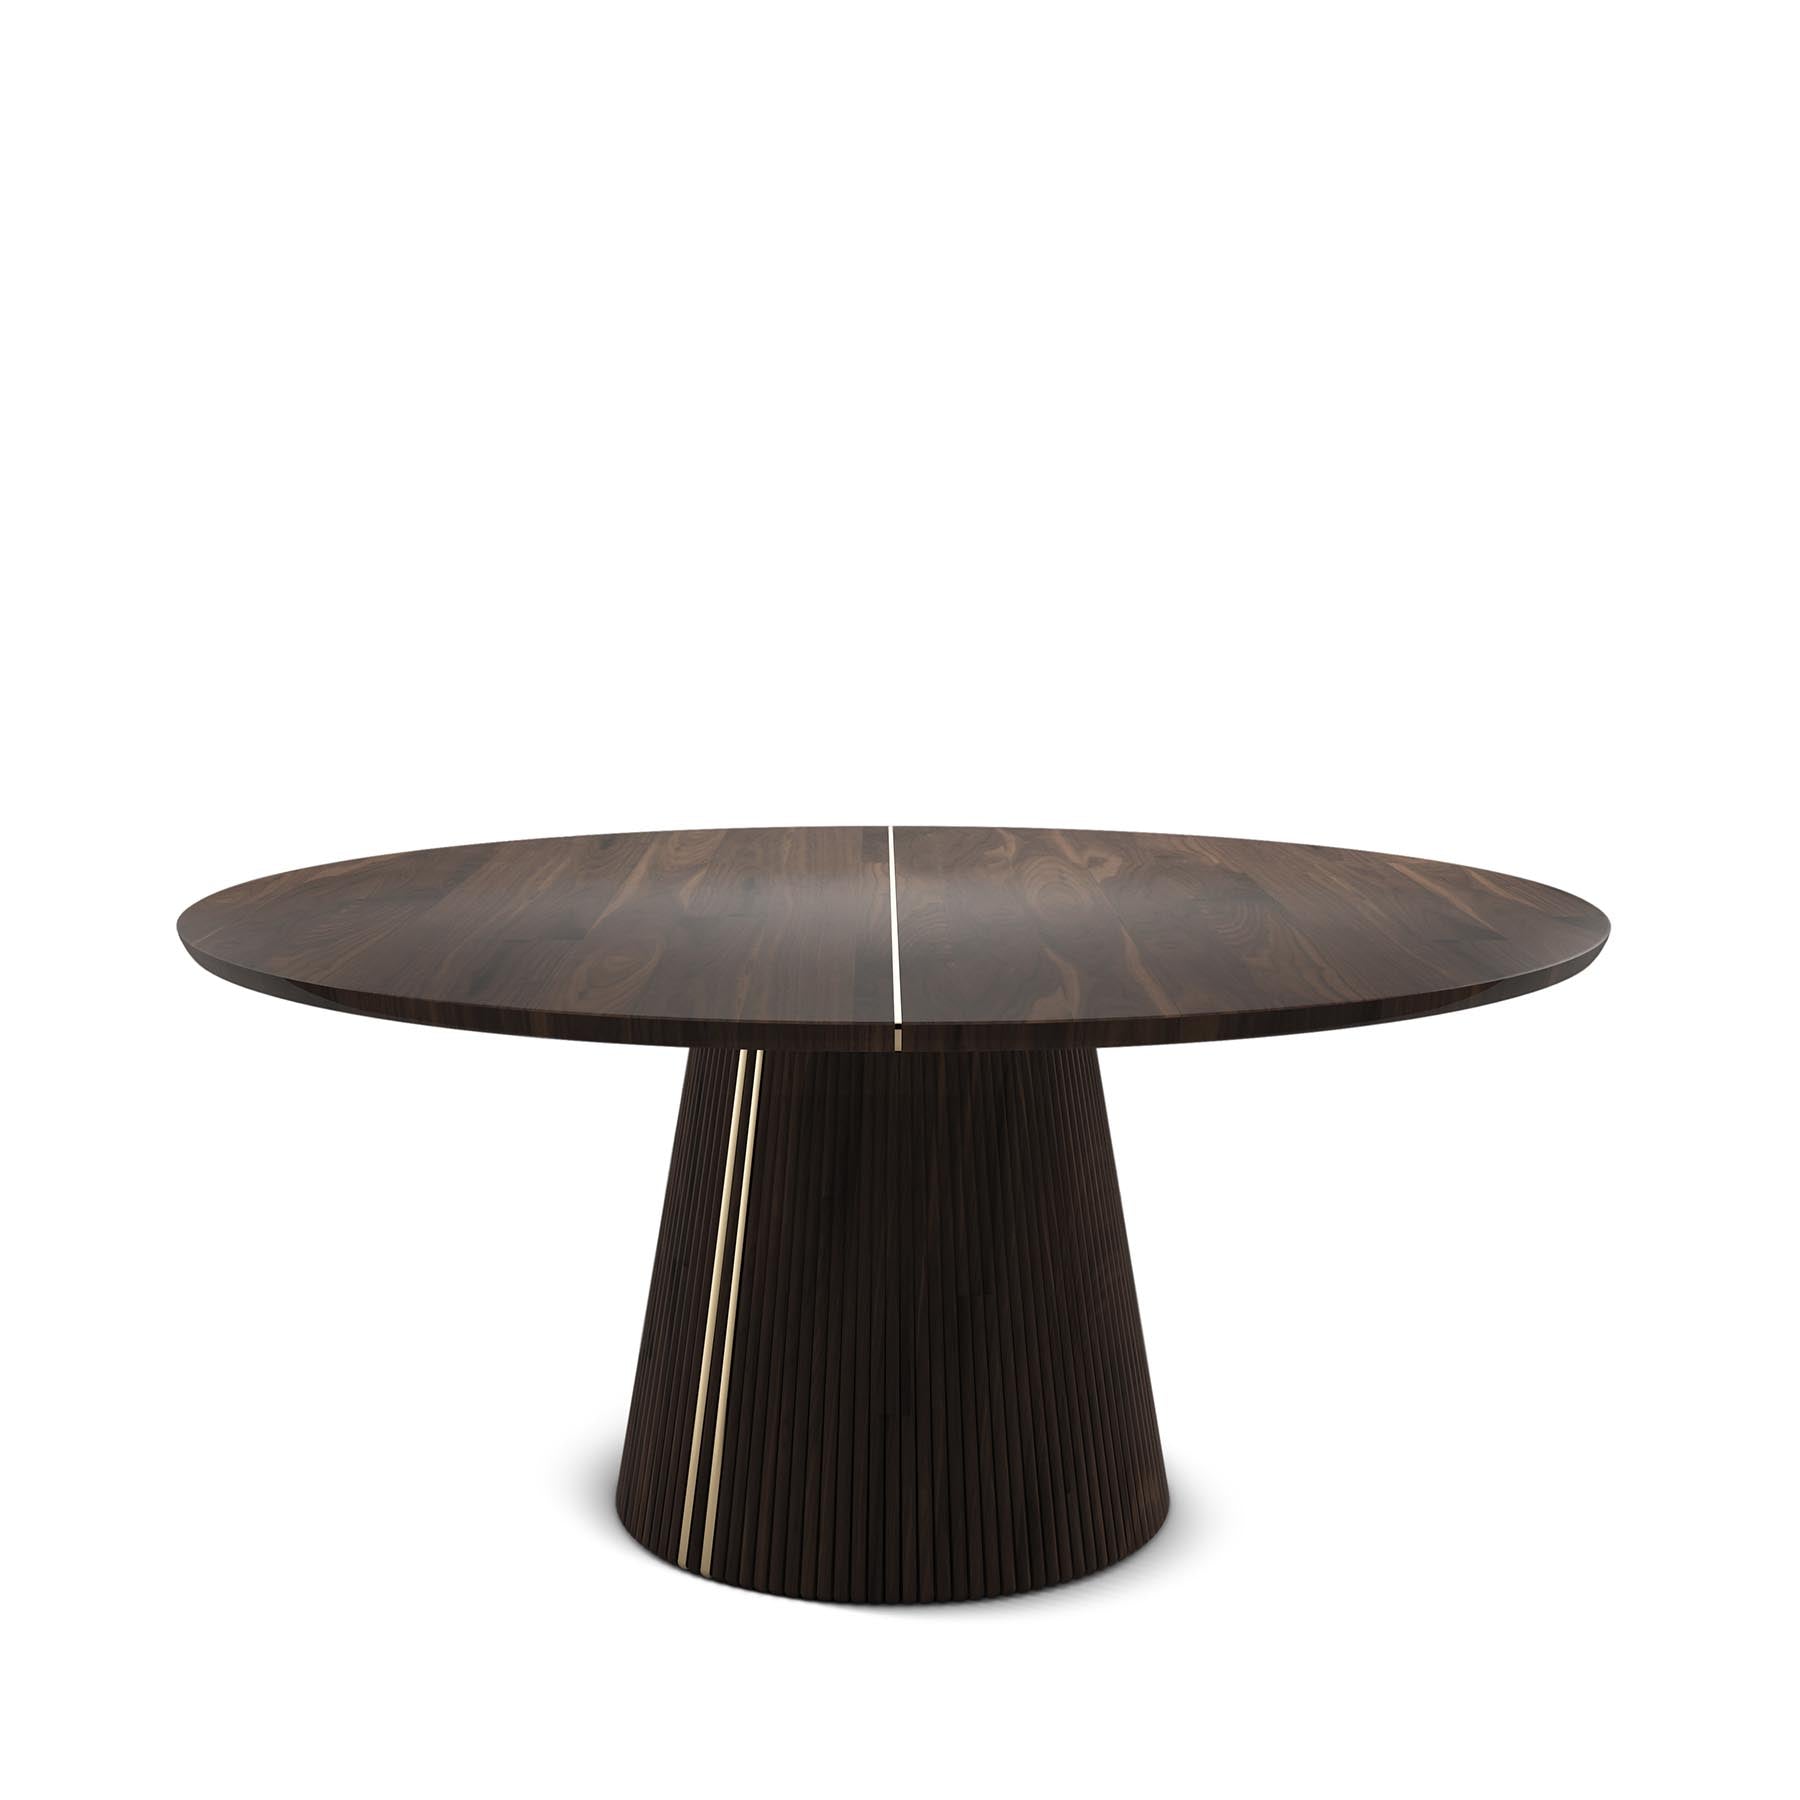 HENRY - DINING TABLE | Modern Furniture + Decor